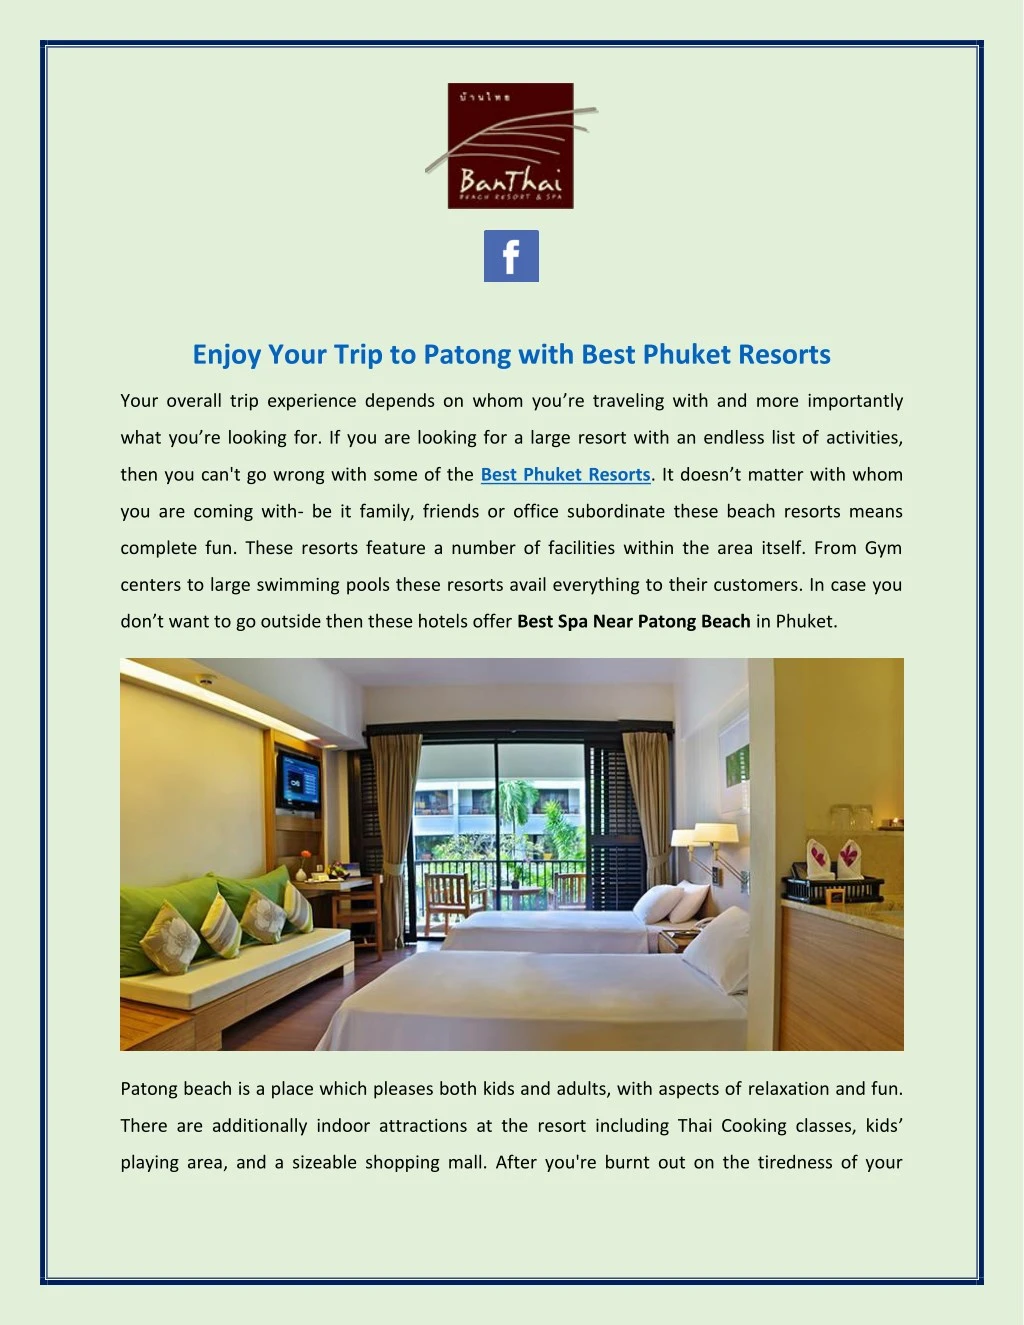 enjoy your trip to patong with best phuket resorts